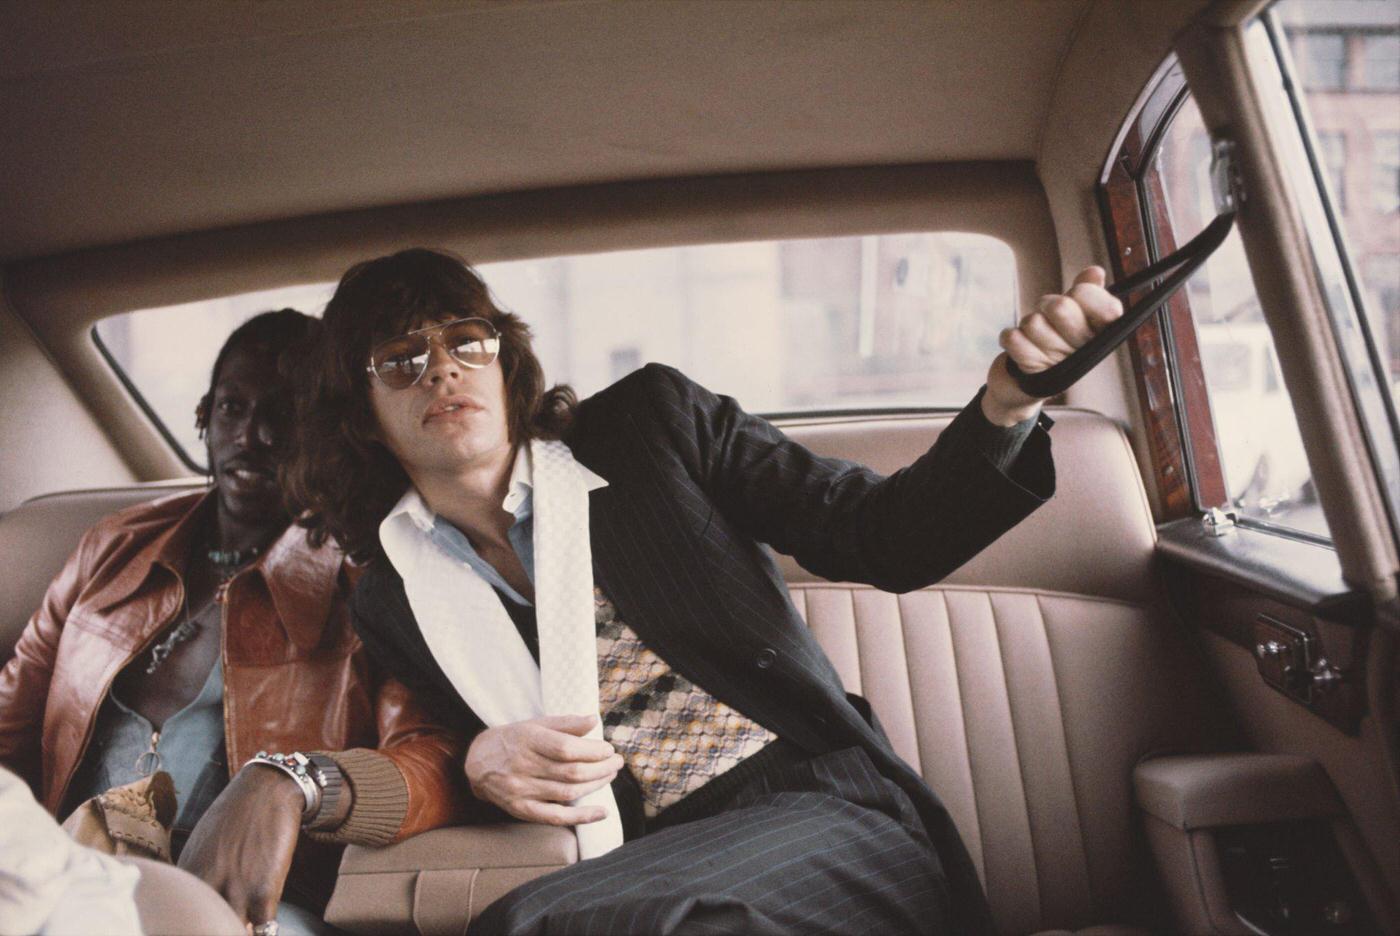 Mick Jagger seated in a limousine car during the tour, June 1975.